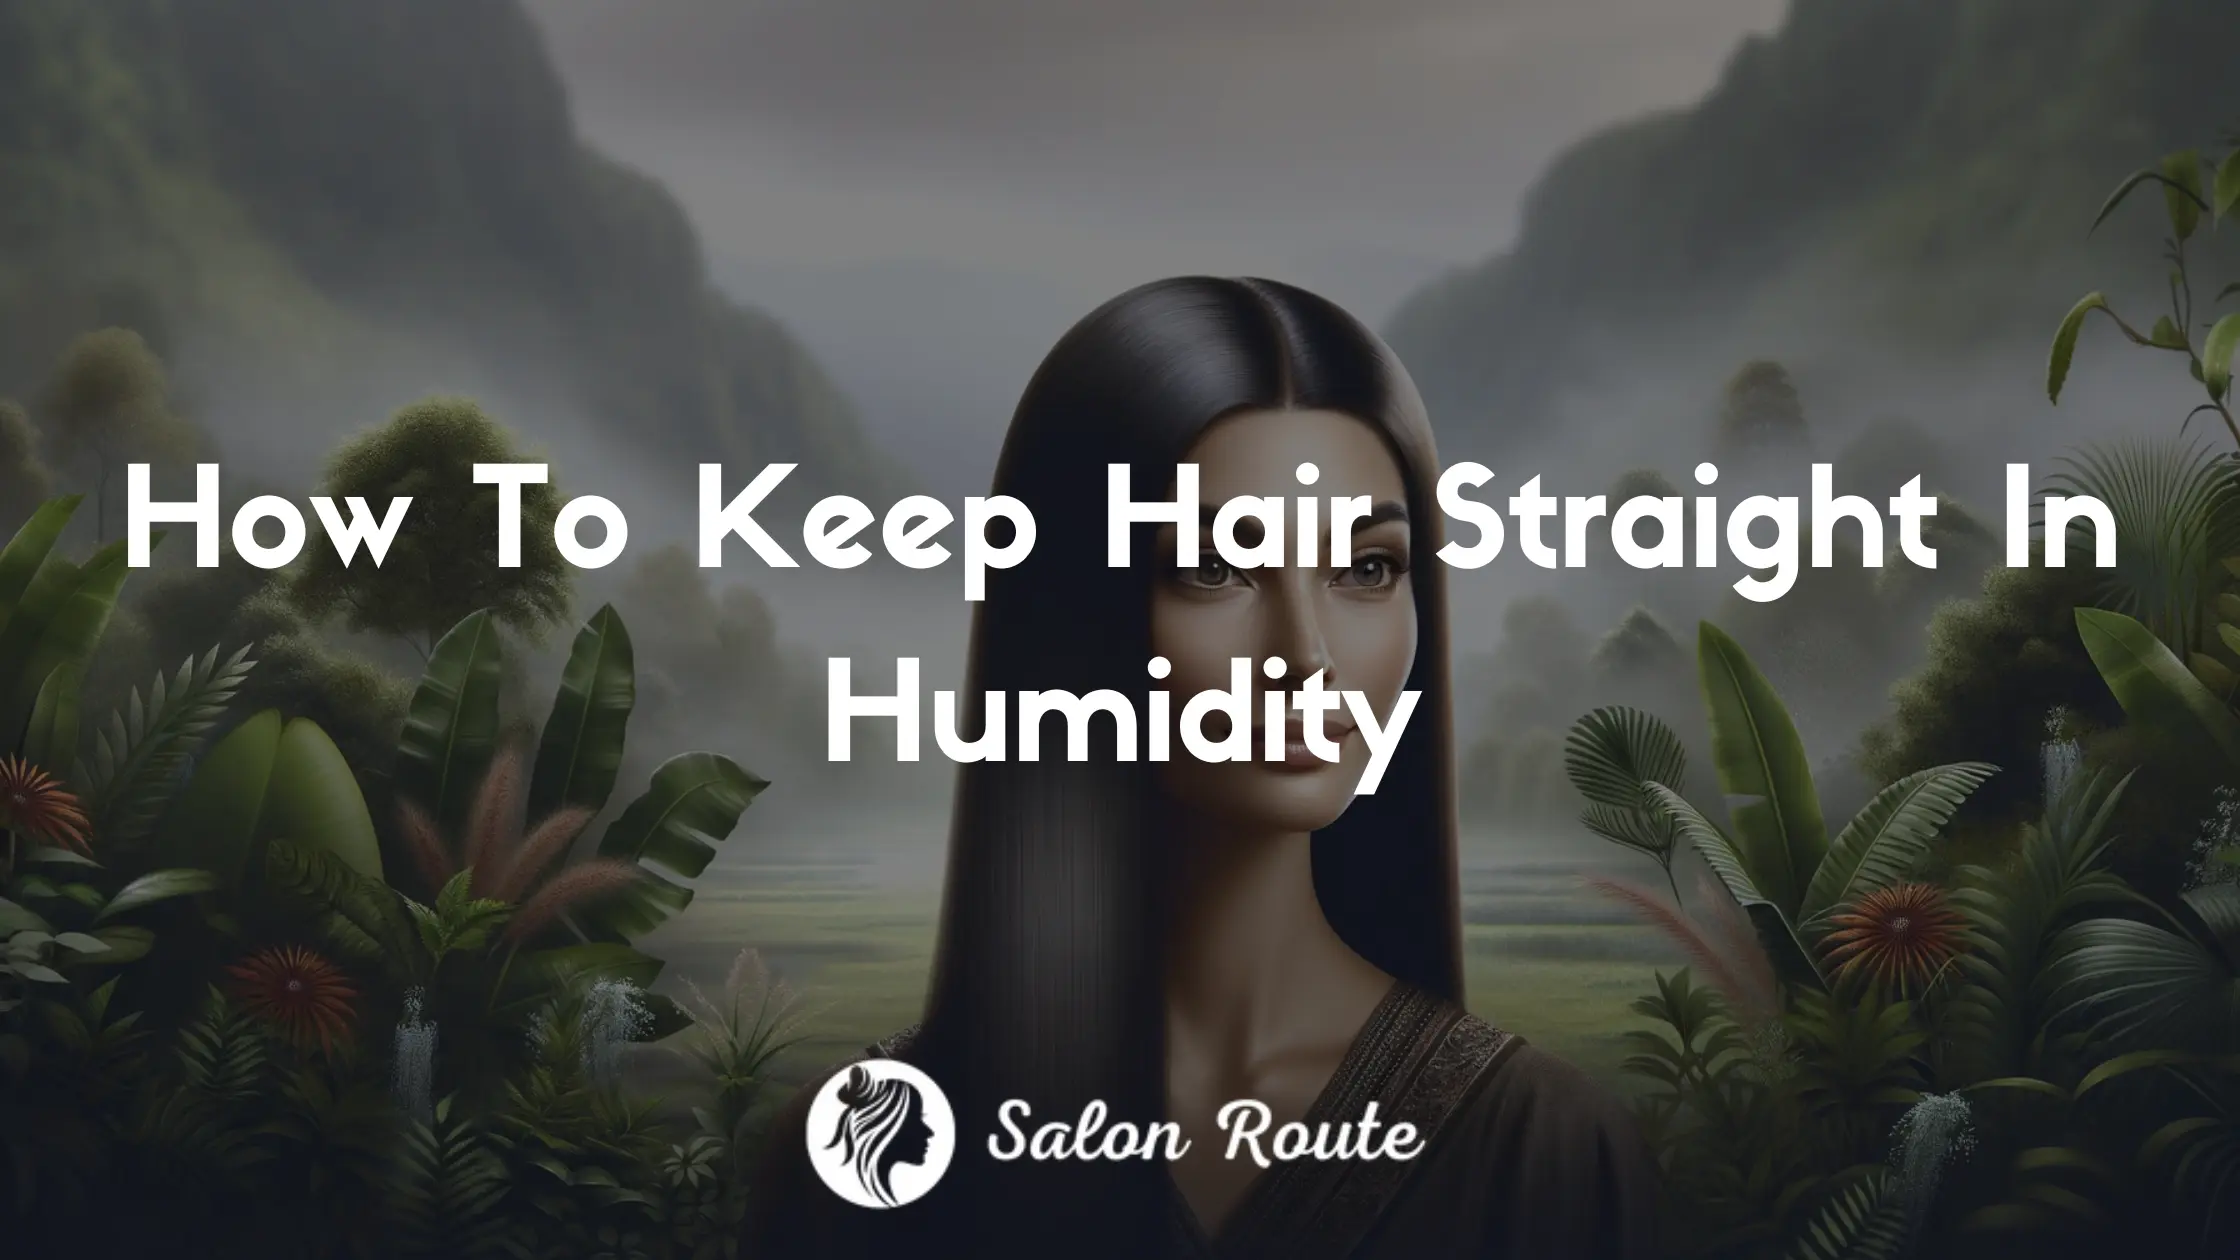 How To Keep Hair Straight In Humidity